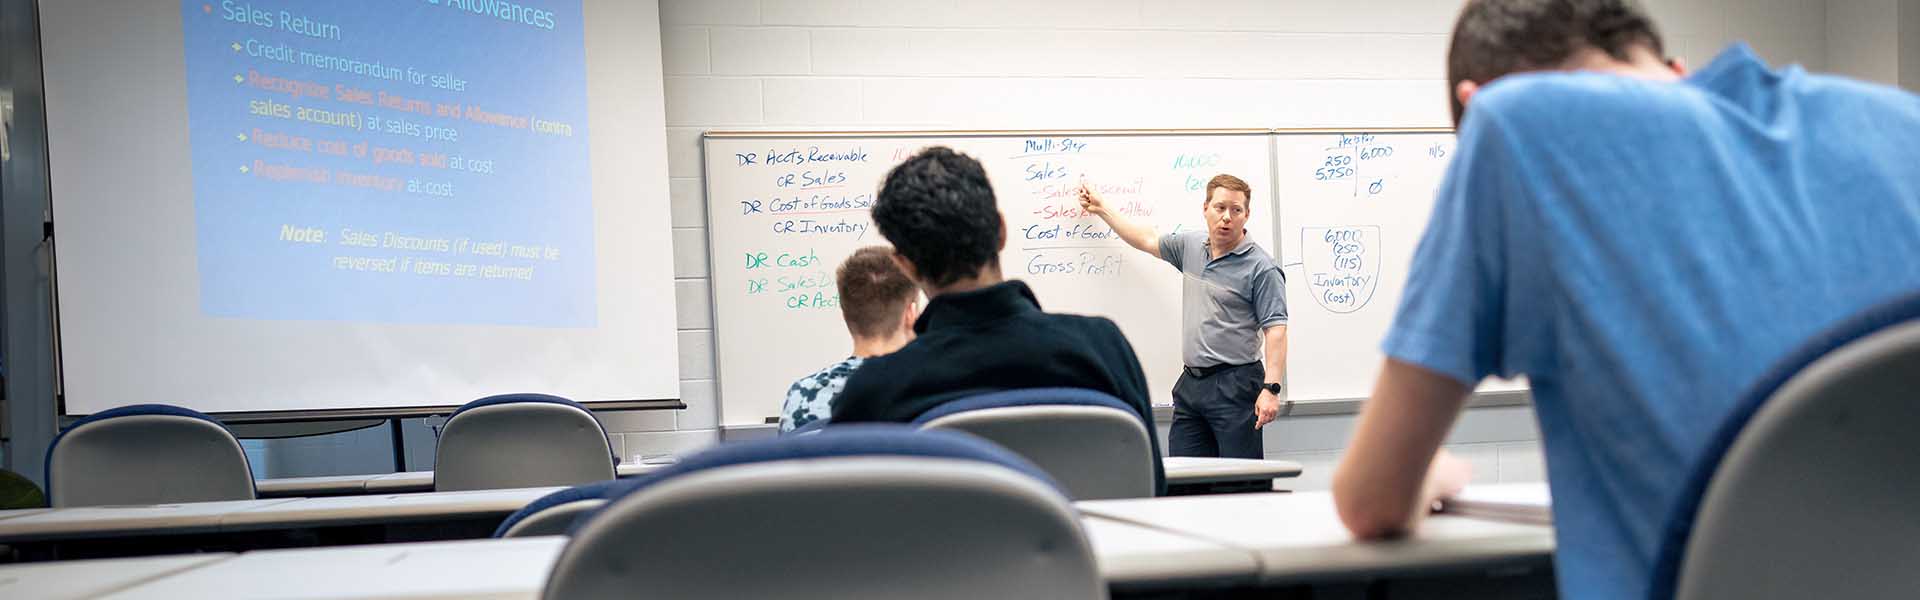 CLC instructor pointing to his notes on the whiteboard in front of students in class